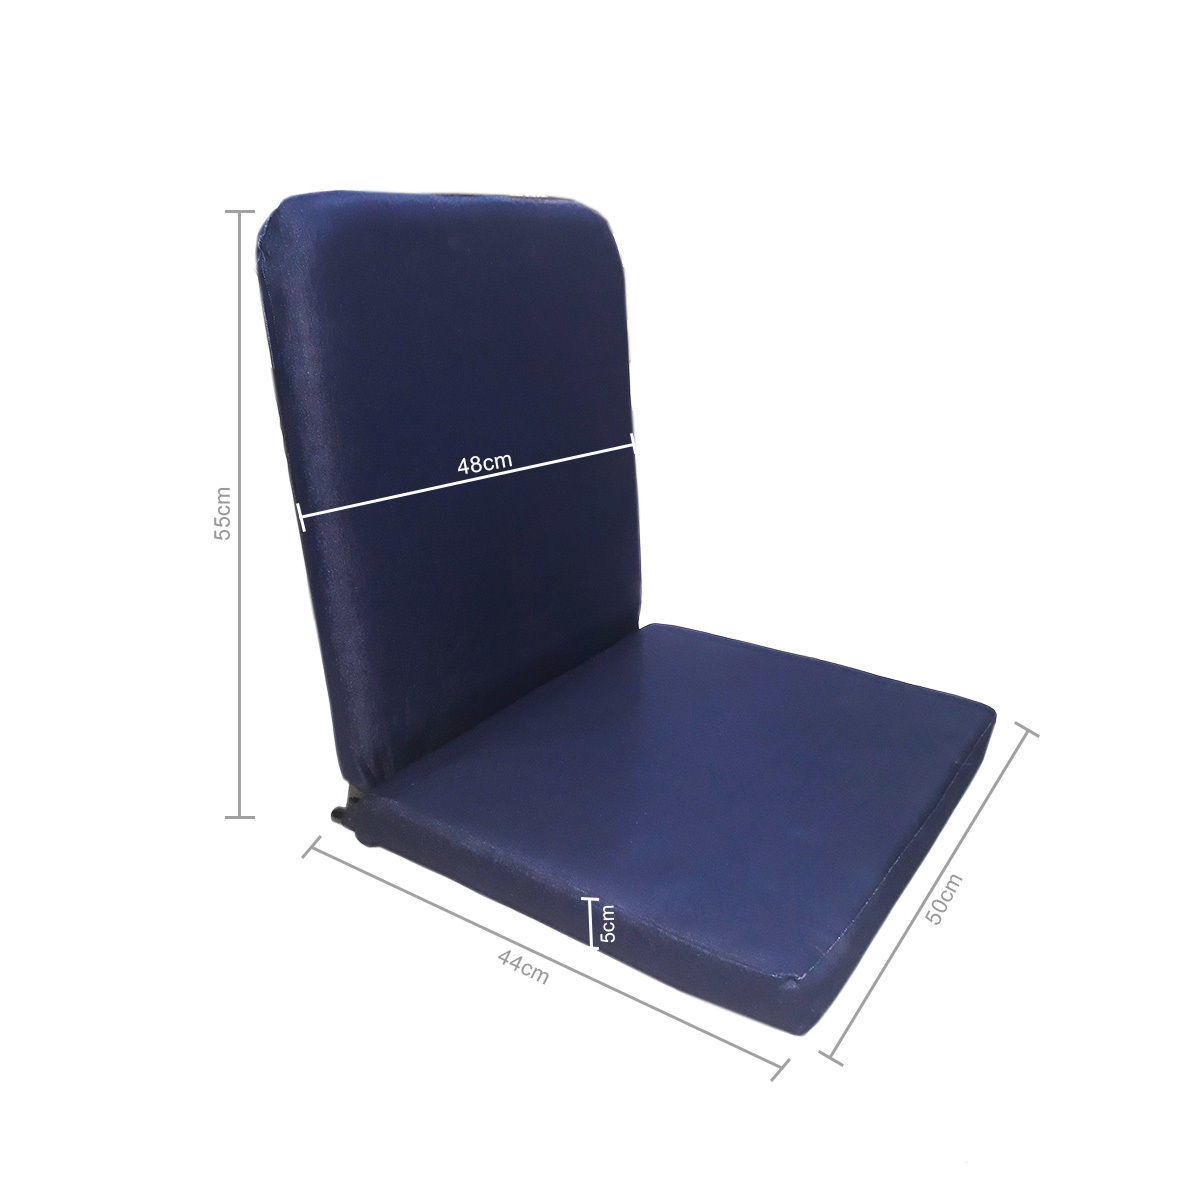 Kawachi Meditation And Yoga Floor Chair With Back Support I83 B